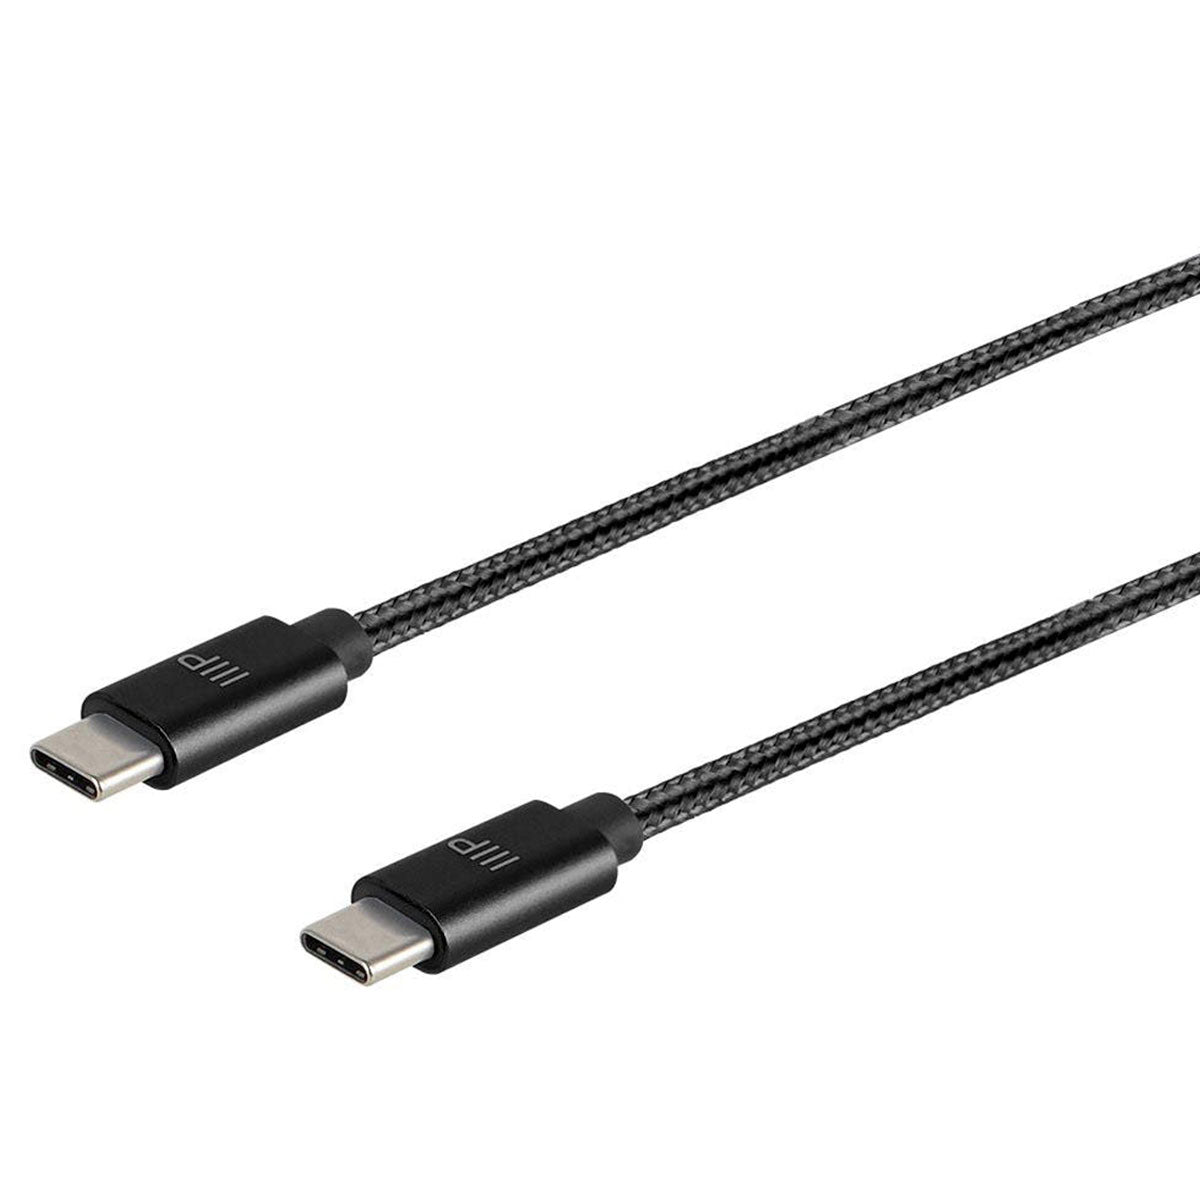 Monoprice Palette Series USB 2.0 Type-C to Type-C Cable, 10ft - Black View 1